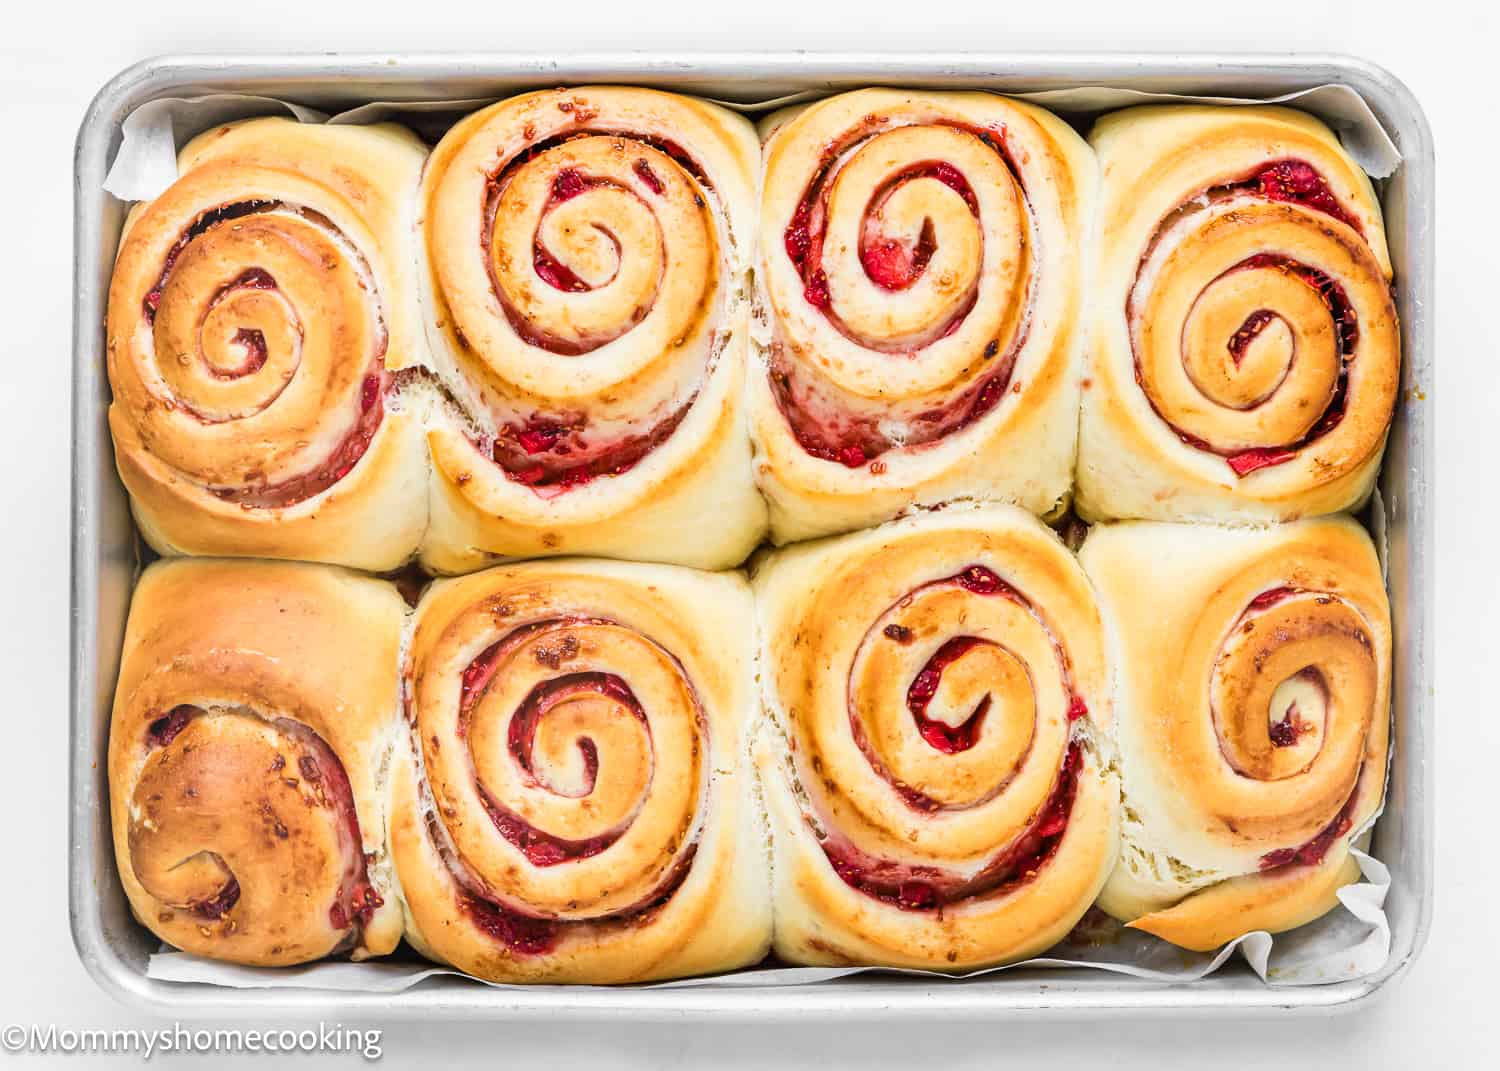 baked Strawberry Rolls in a baking tray.